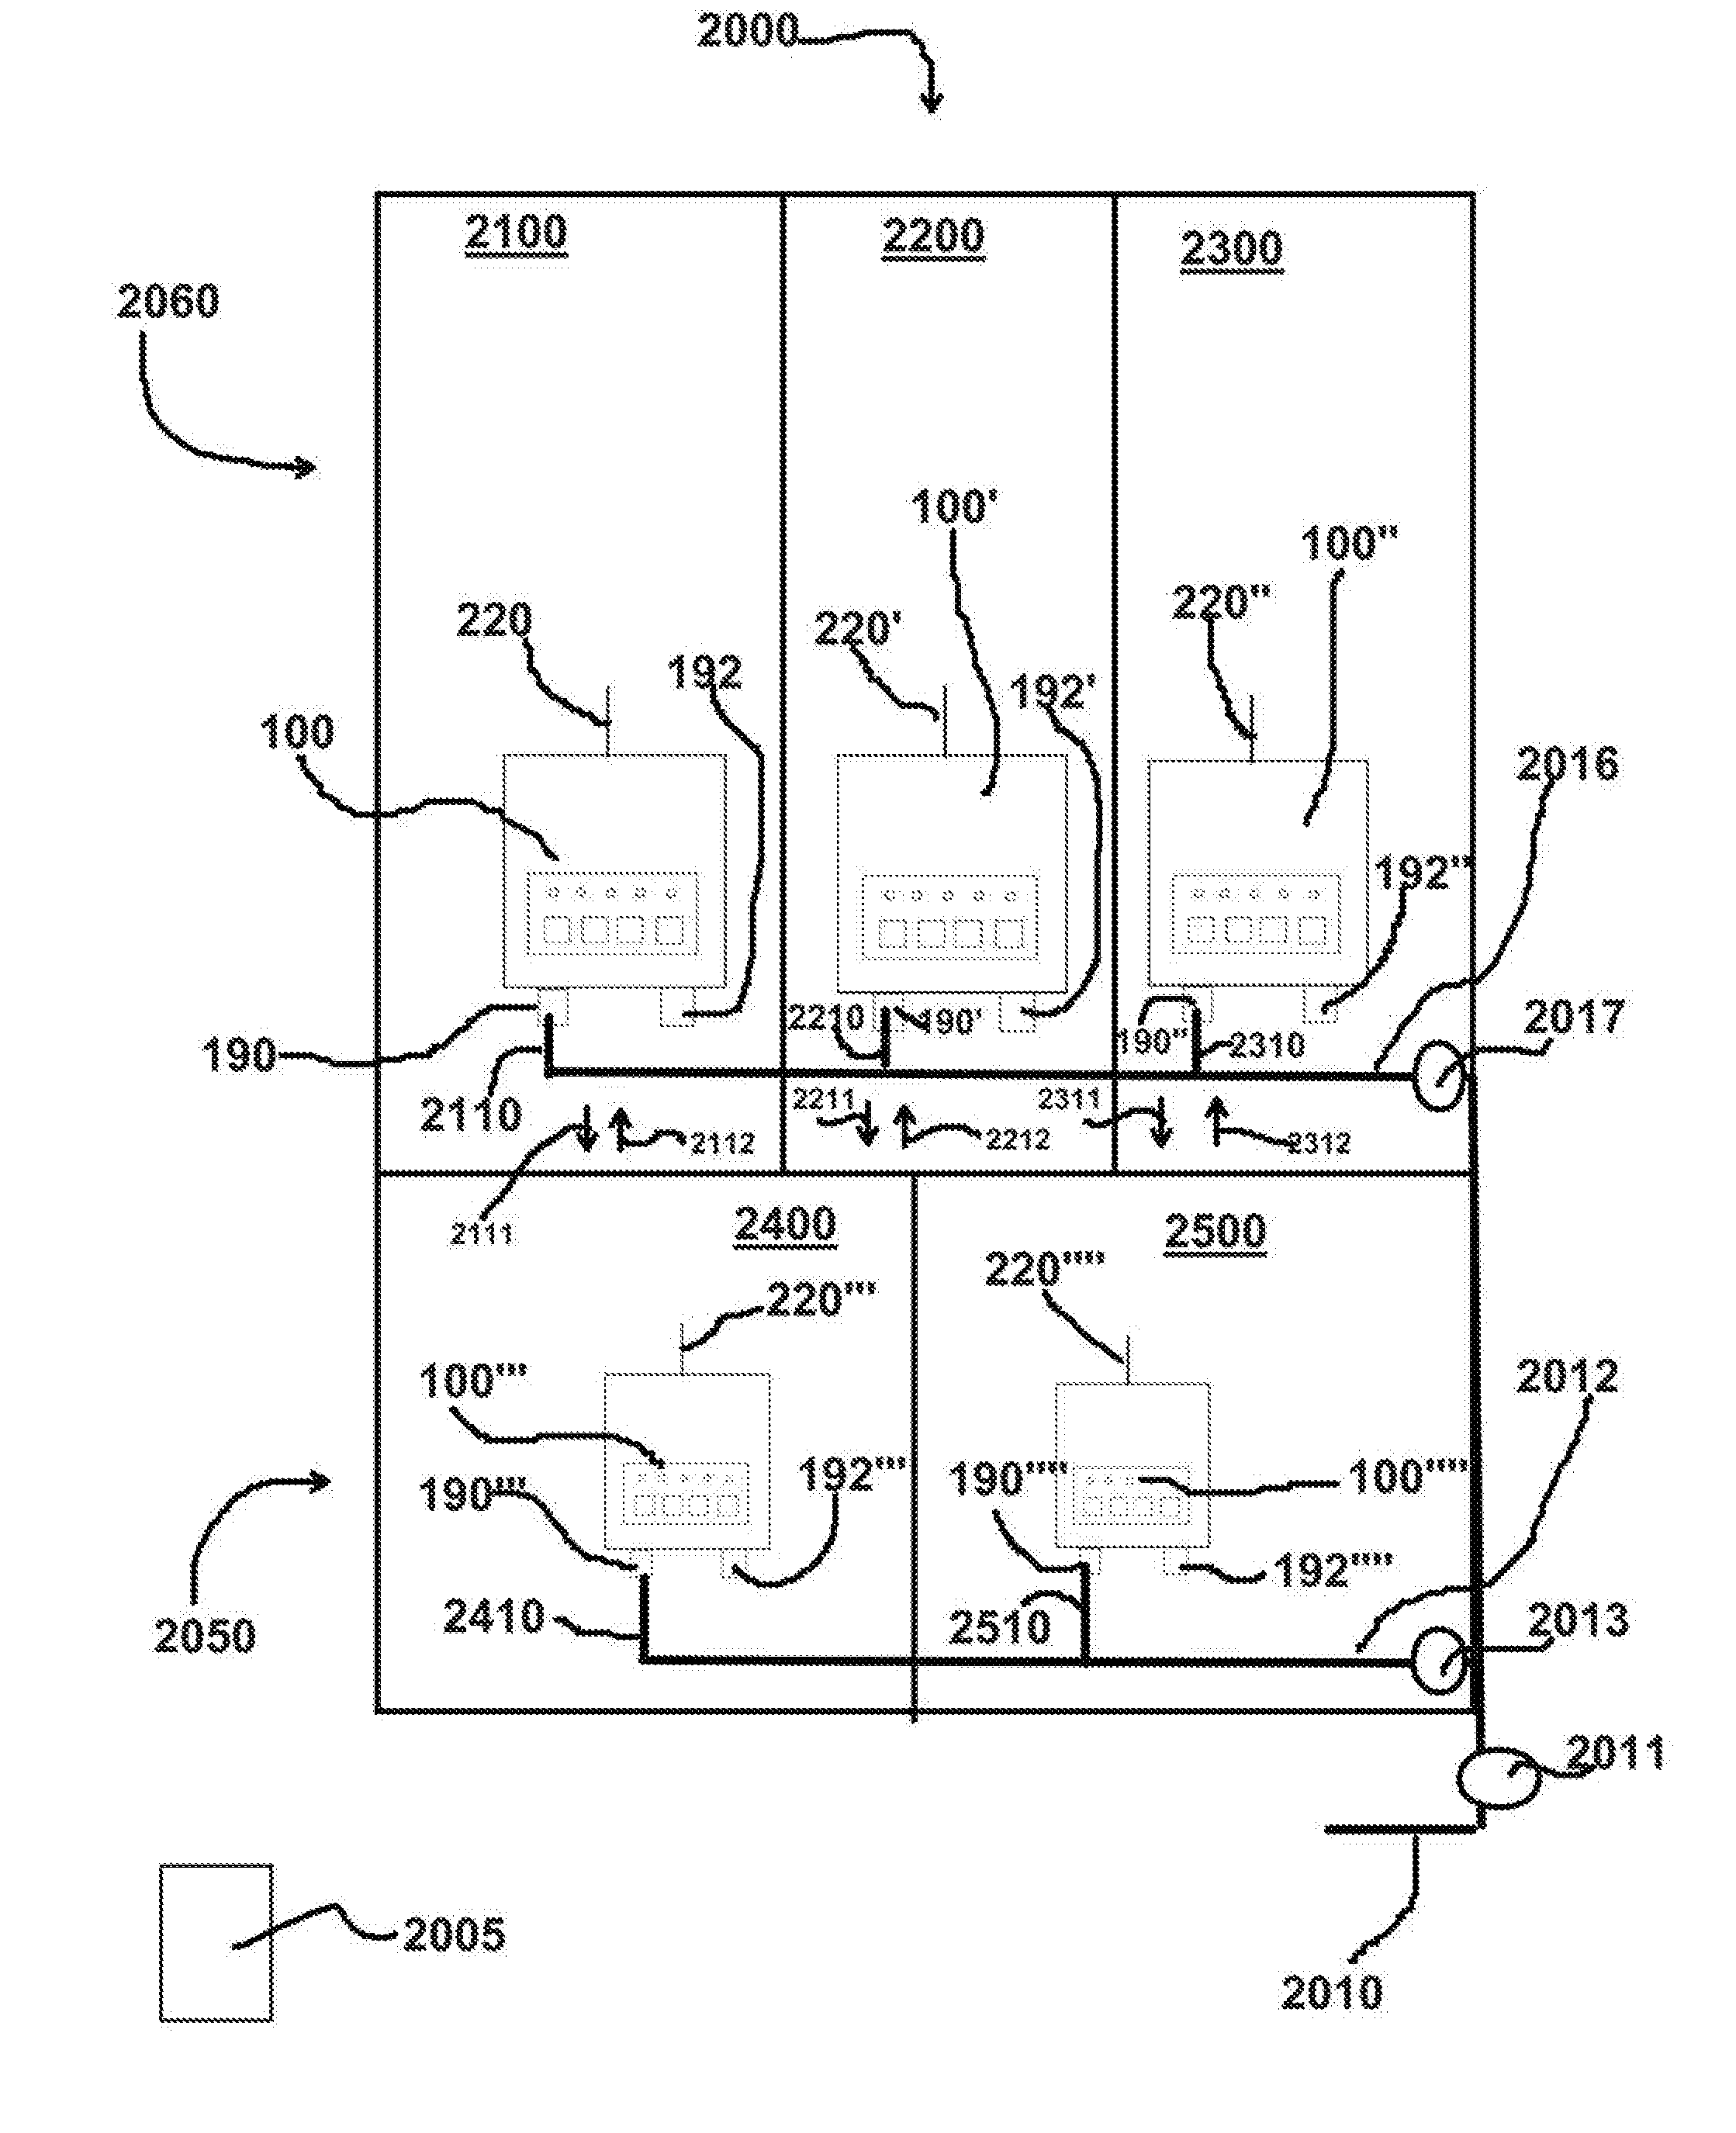 Method and Apparatus for Detecting Leaks in a Building Water System